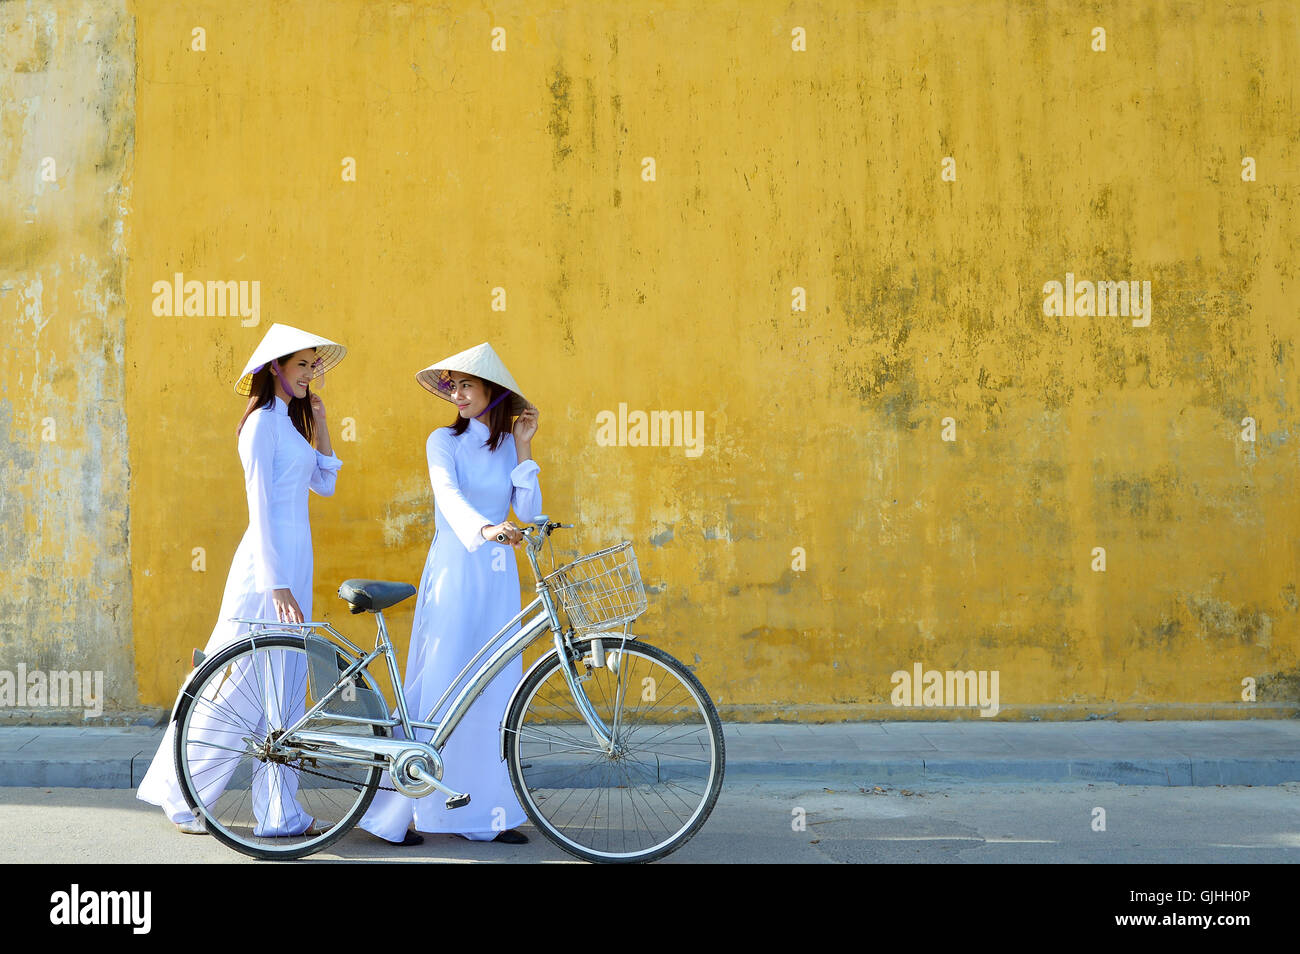 Two women in traditional clothing standing in street talking, Hoi An, Vietnam Stock Photo